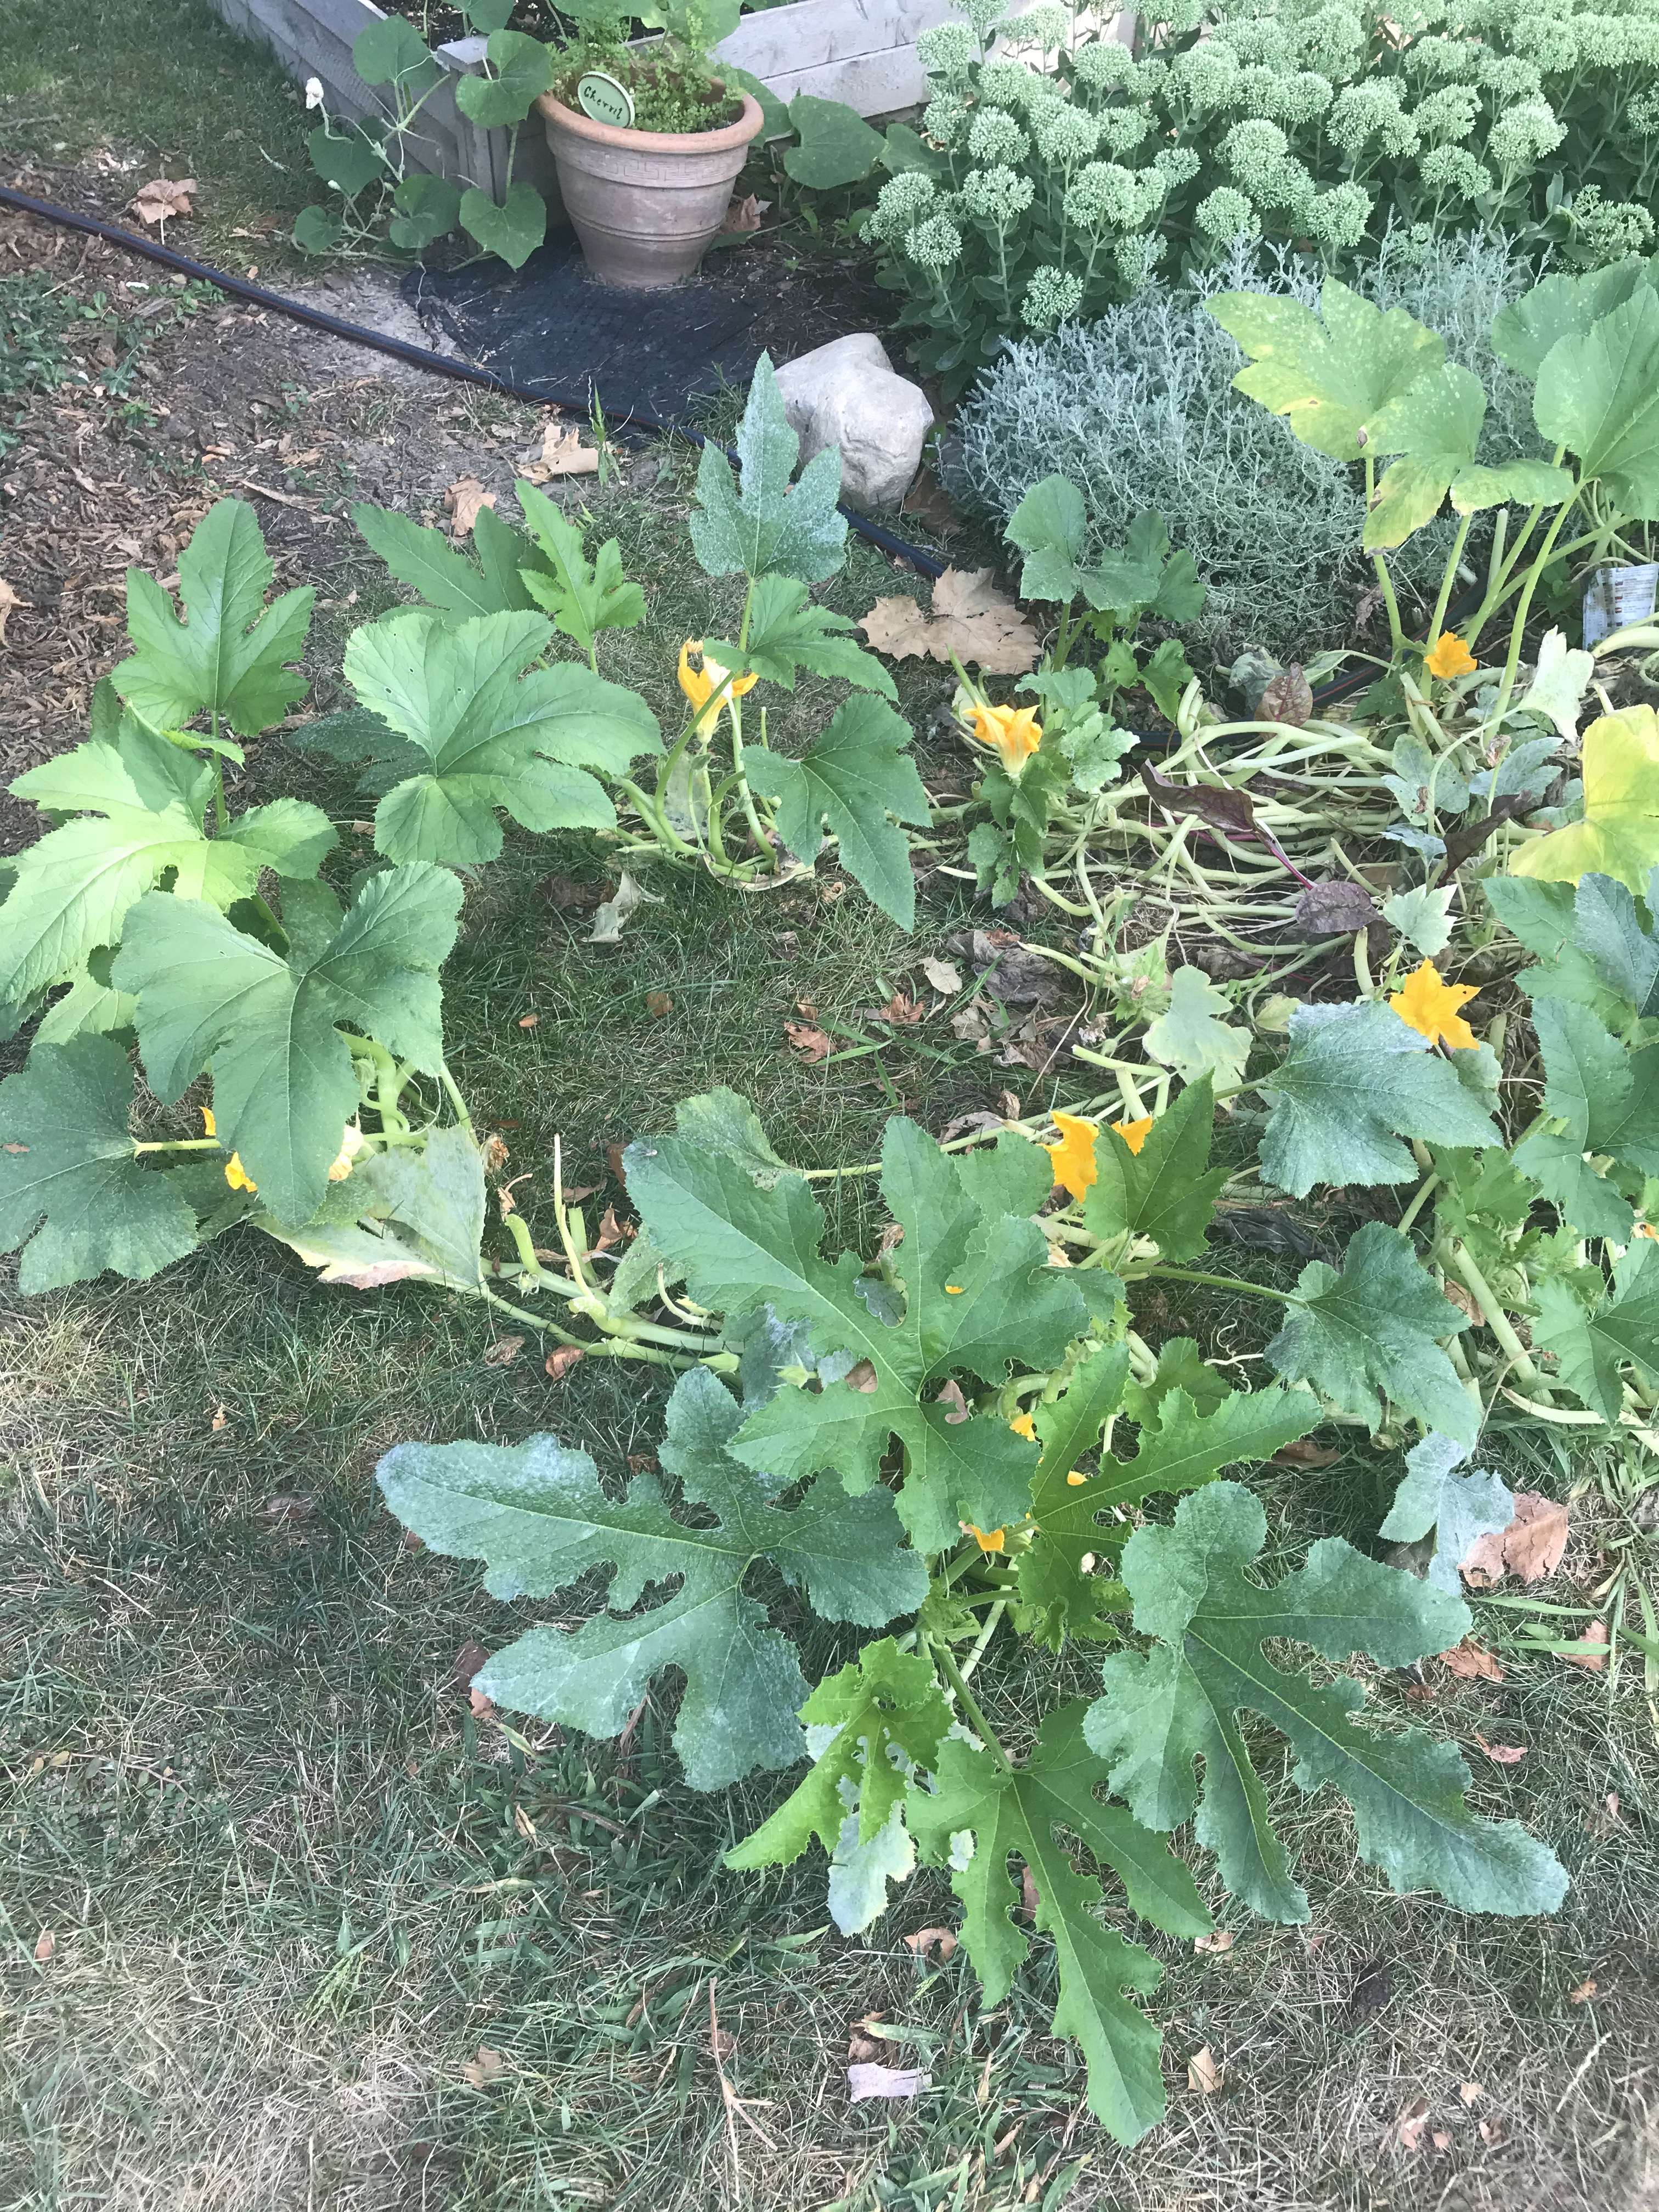 Late summer zucchini plants have healthy, large, leaves, but are growing outside of the garden.